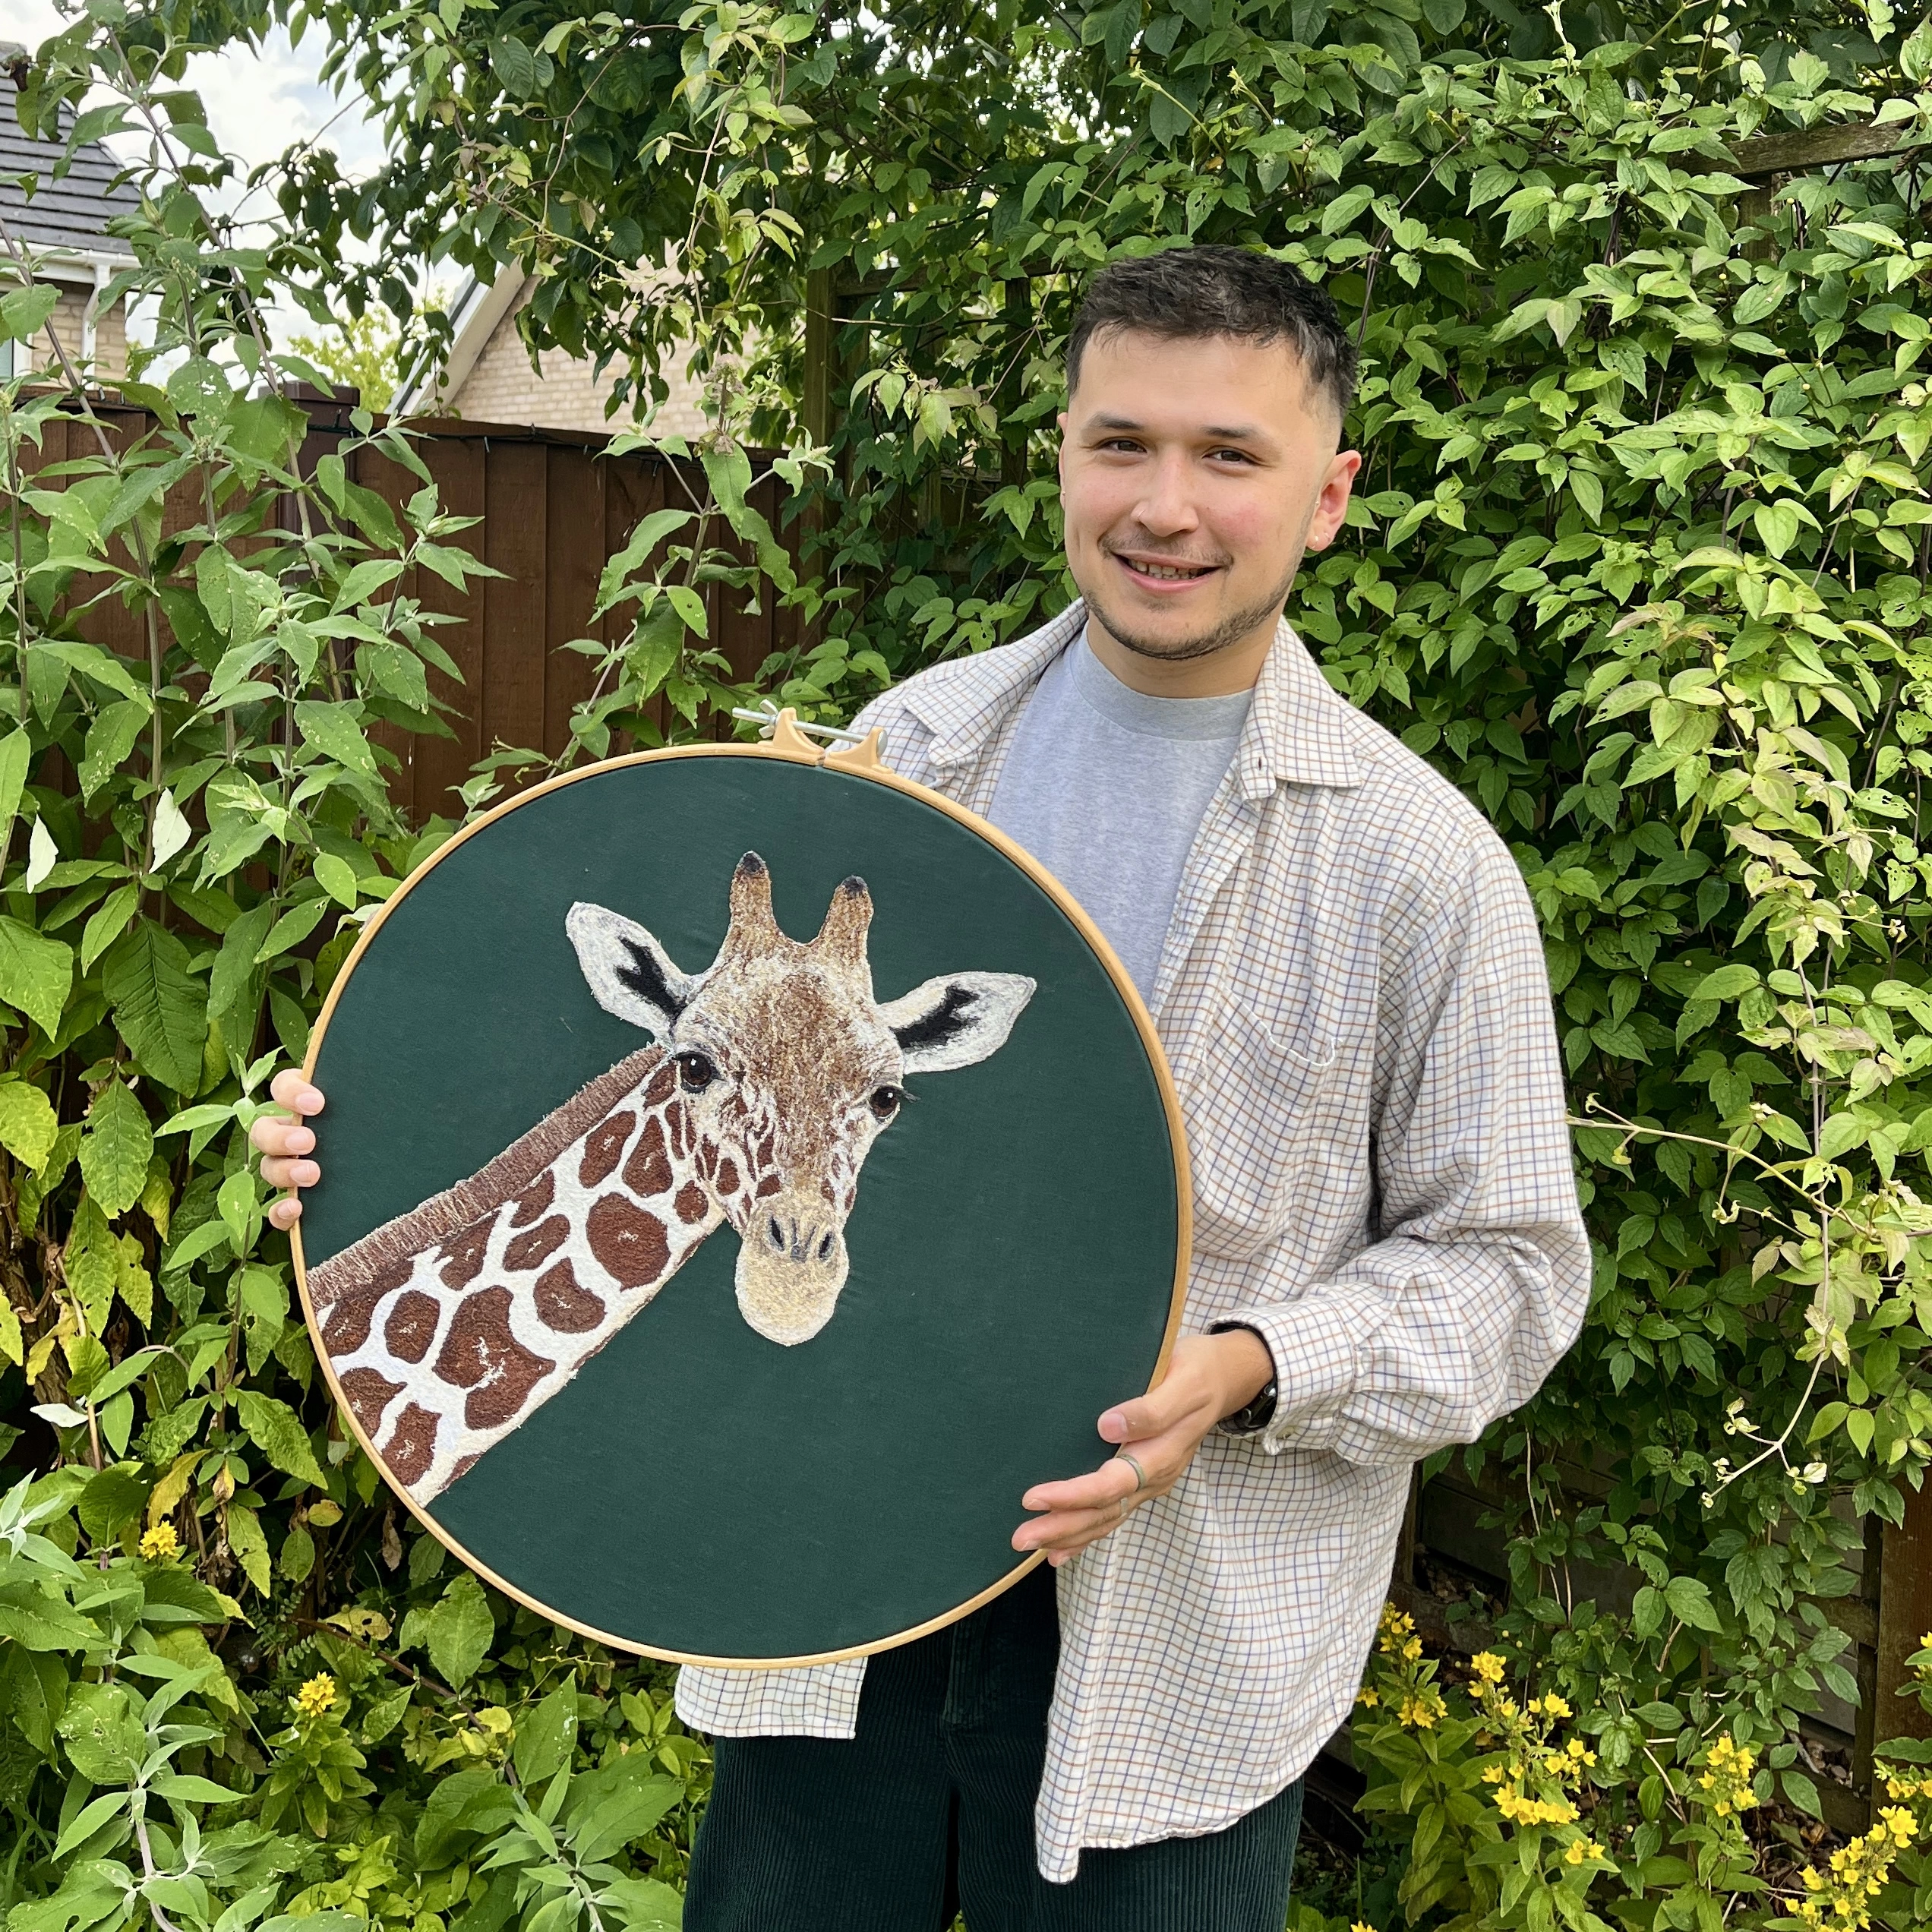 Alan from Stitched by Alan holding a Giraffe Embroidery